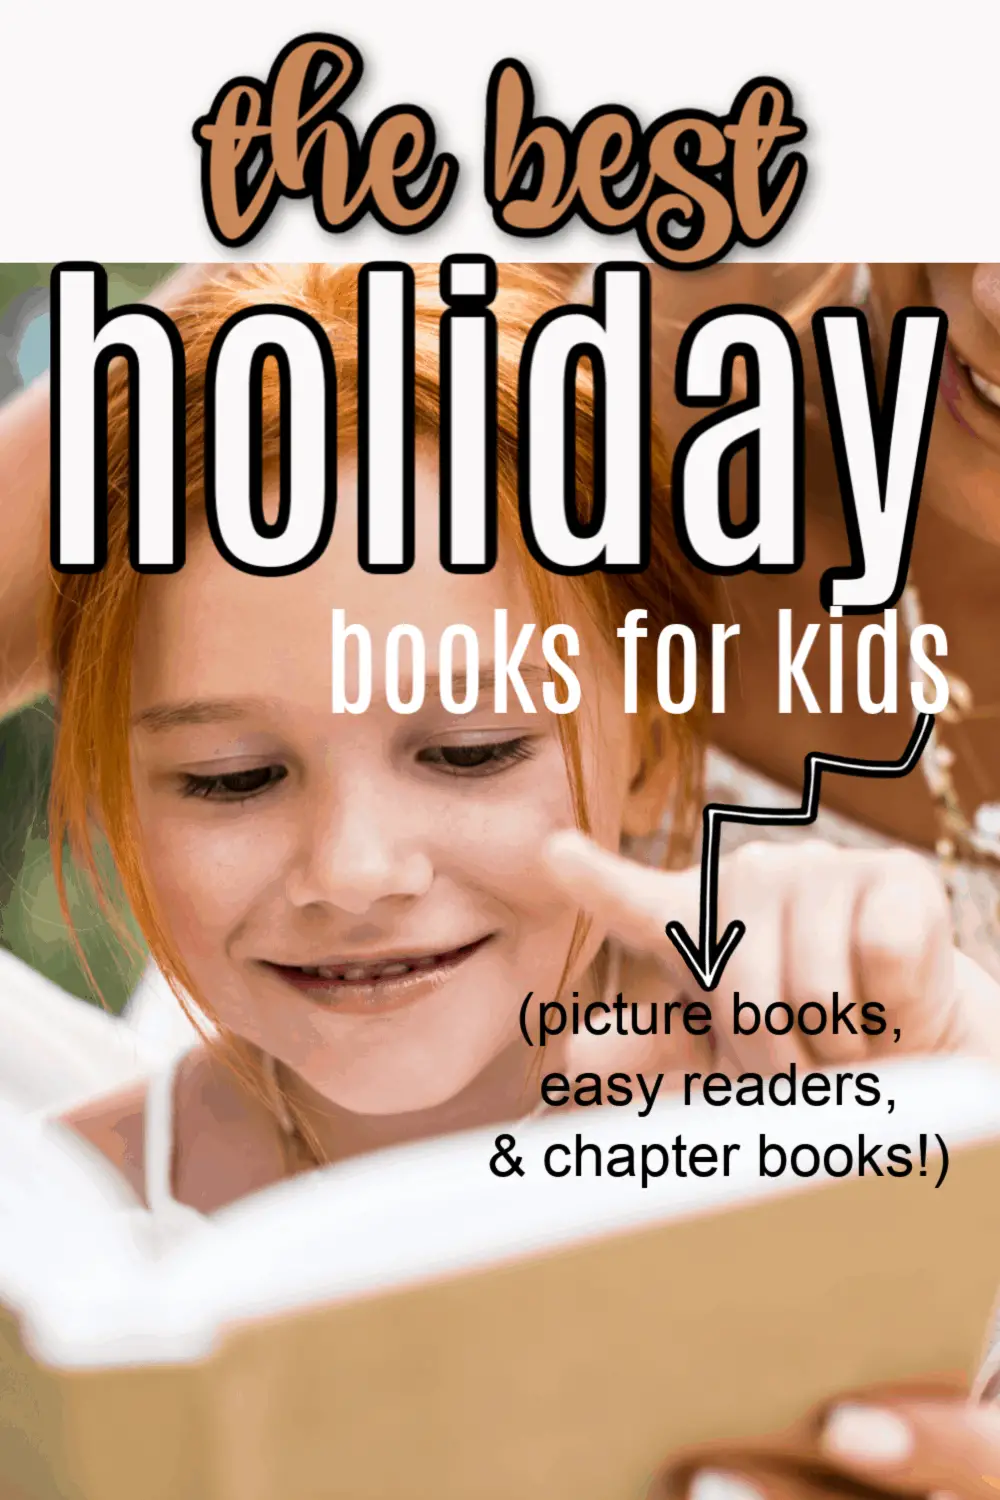 Come explore this amazing growing collection of the holiday books for kids. Discover books on a wide variety of topics covering animals, seasons, holidays, and much more!